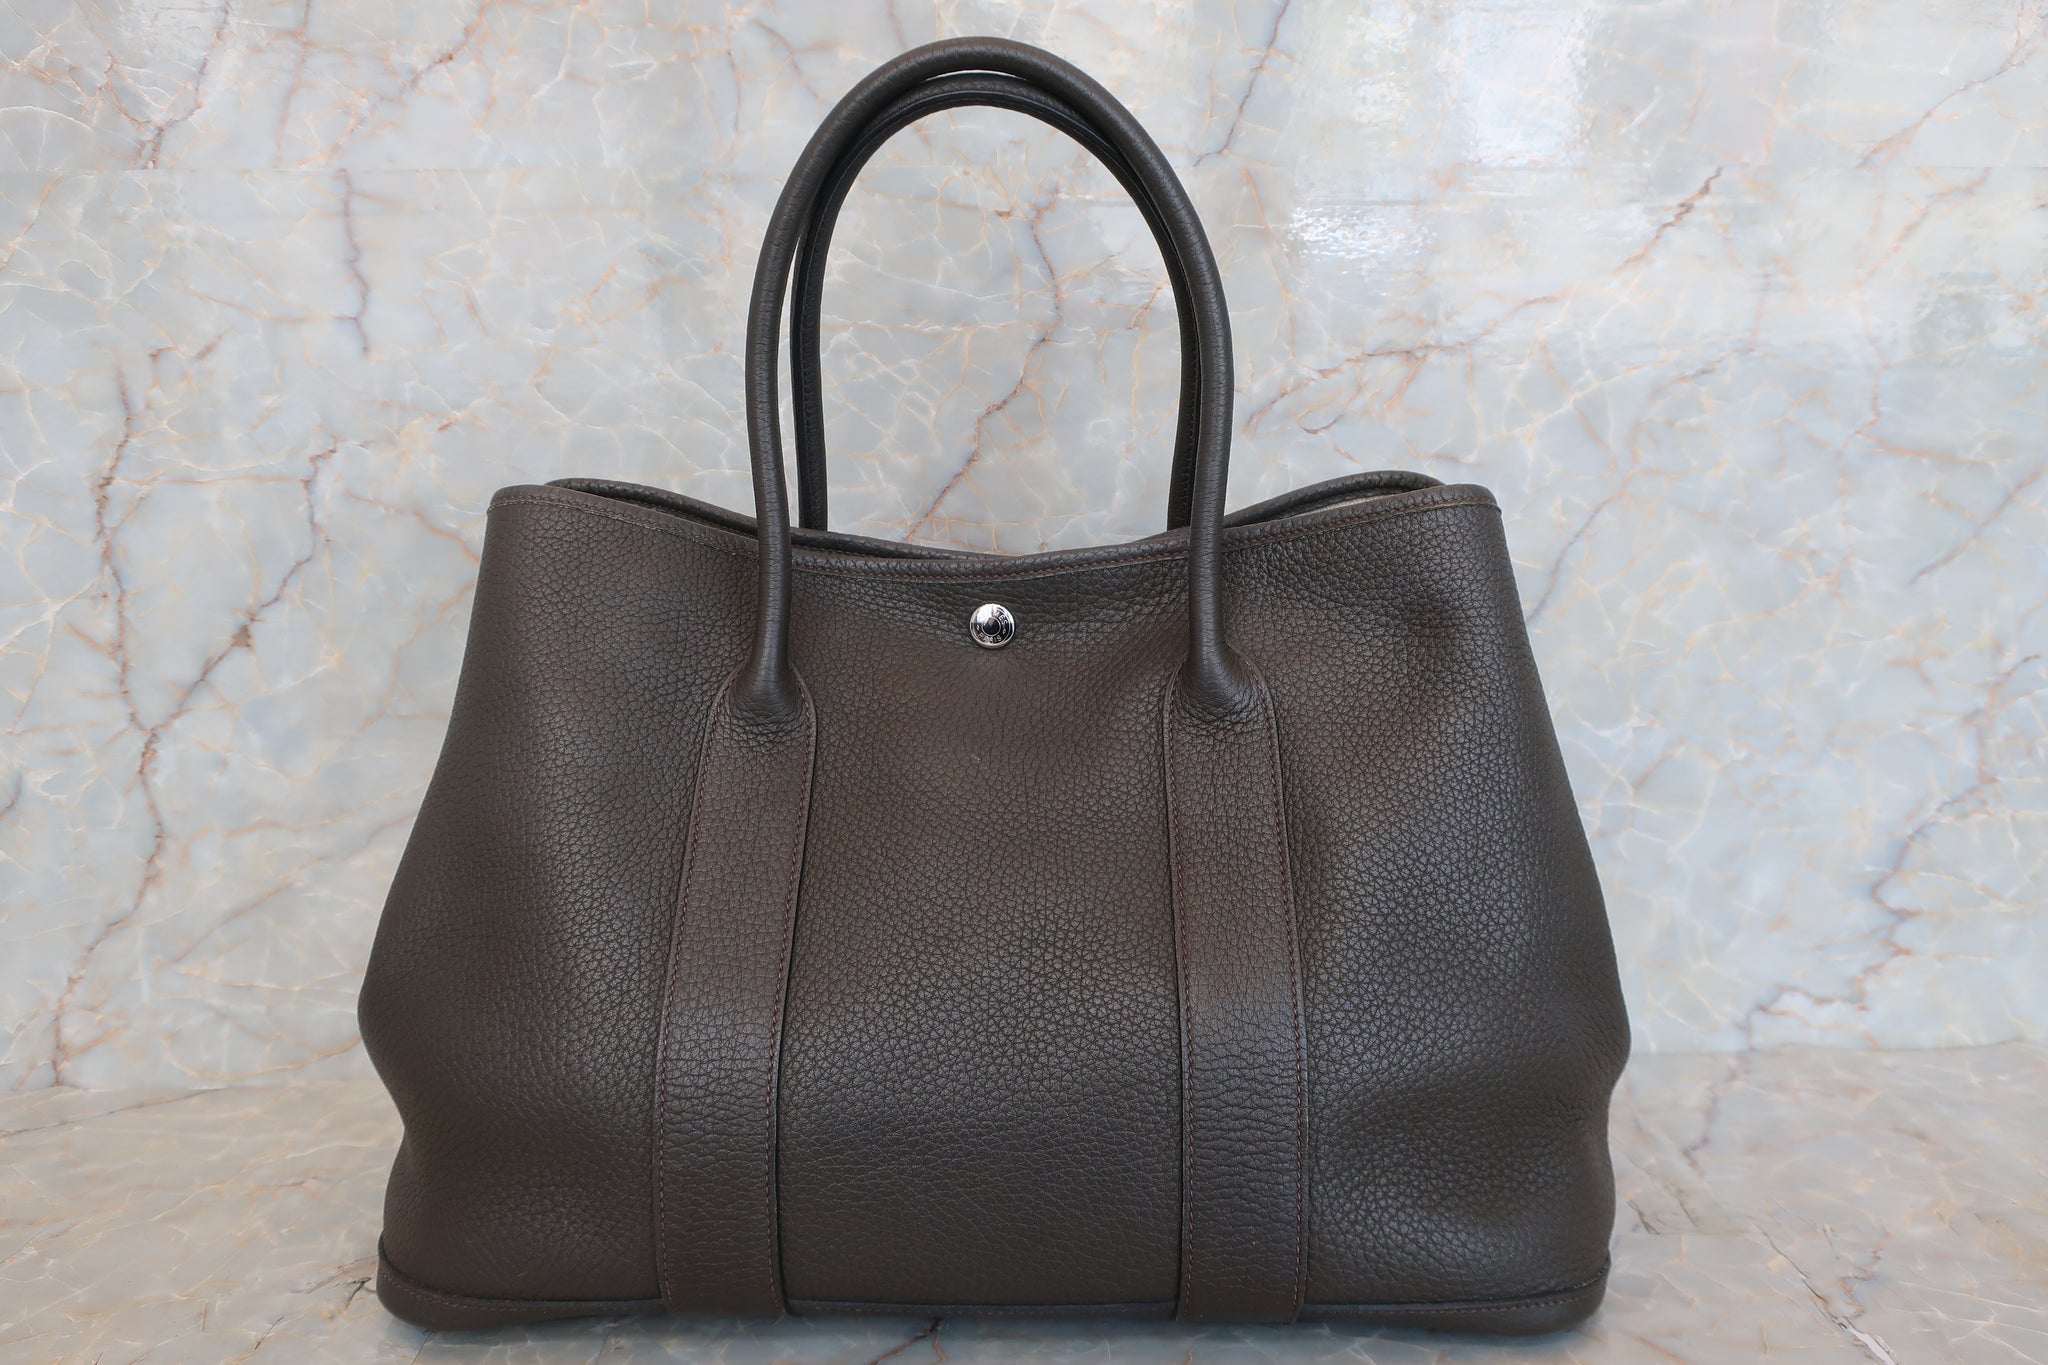 HERMES GARDEN PARTY PM Negonda leather Graphite □N Engraving Tote